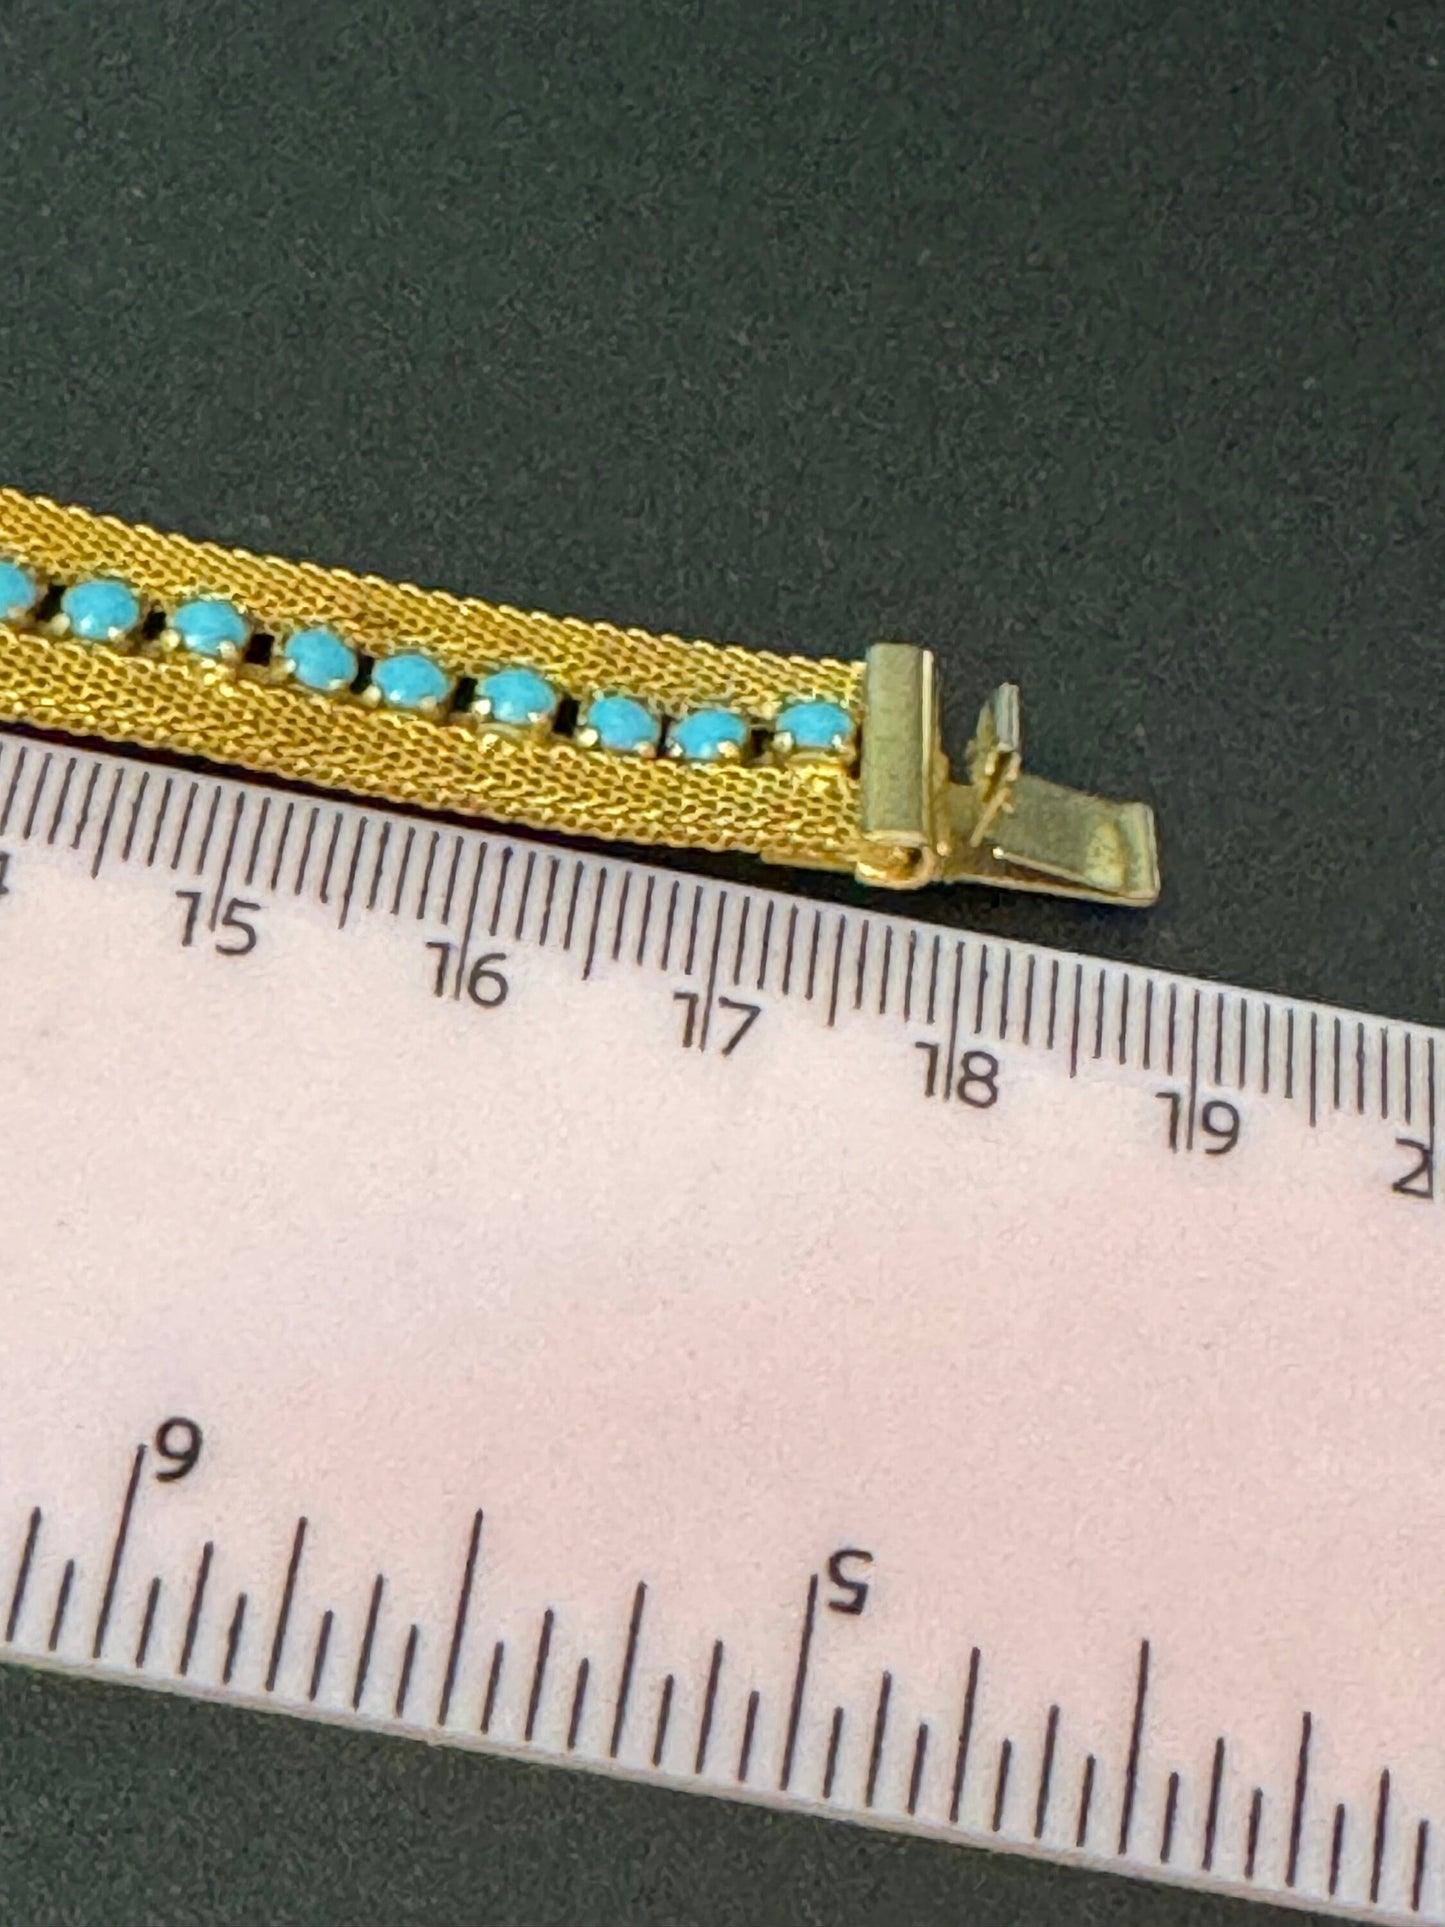 Vintage articulated flat link mesh gold bracelet with turquoise blue paste